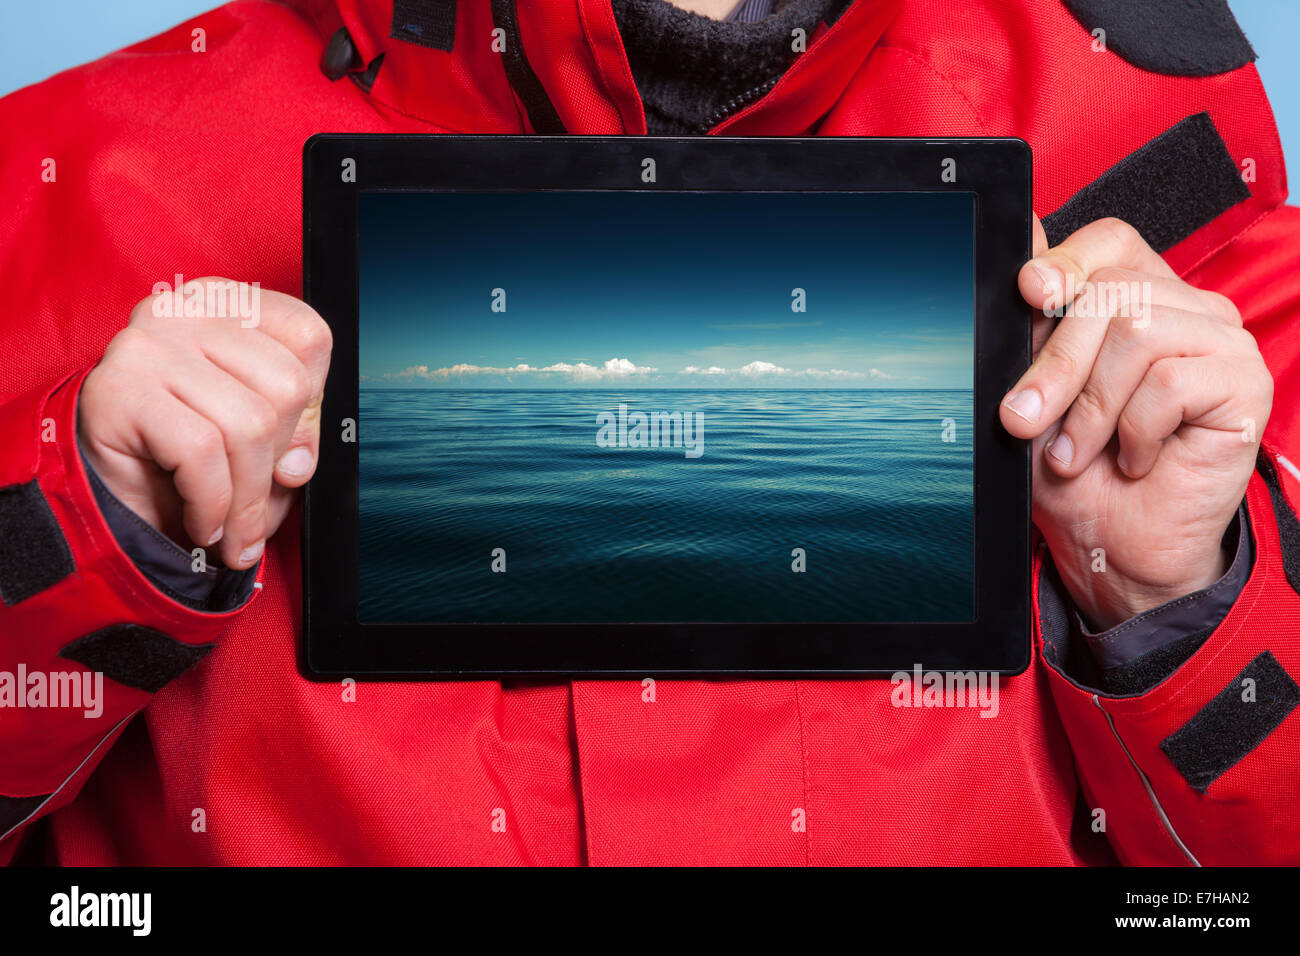 Closeup of male hands holding ipad with photo of stormy sea. Man showing screen tablet touchpad dreaming about holiday vacation. Stock Photo